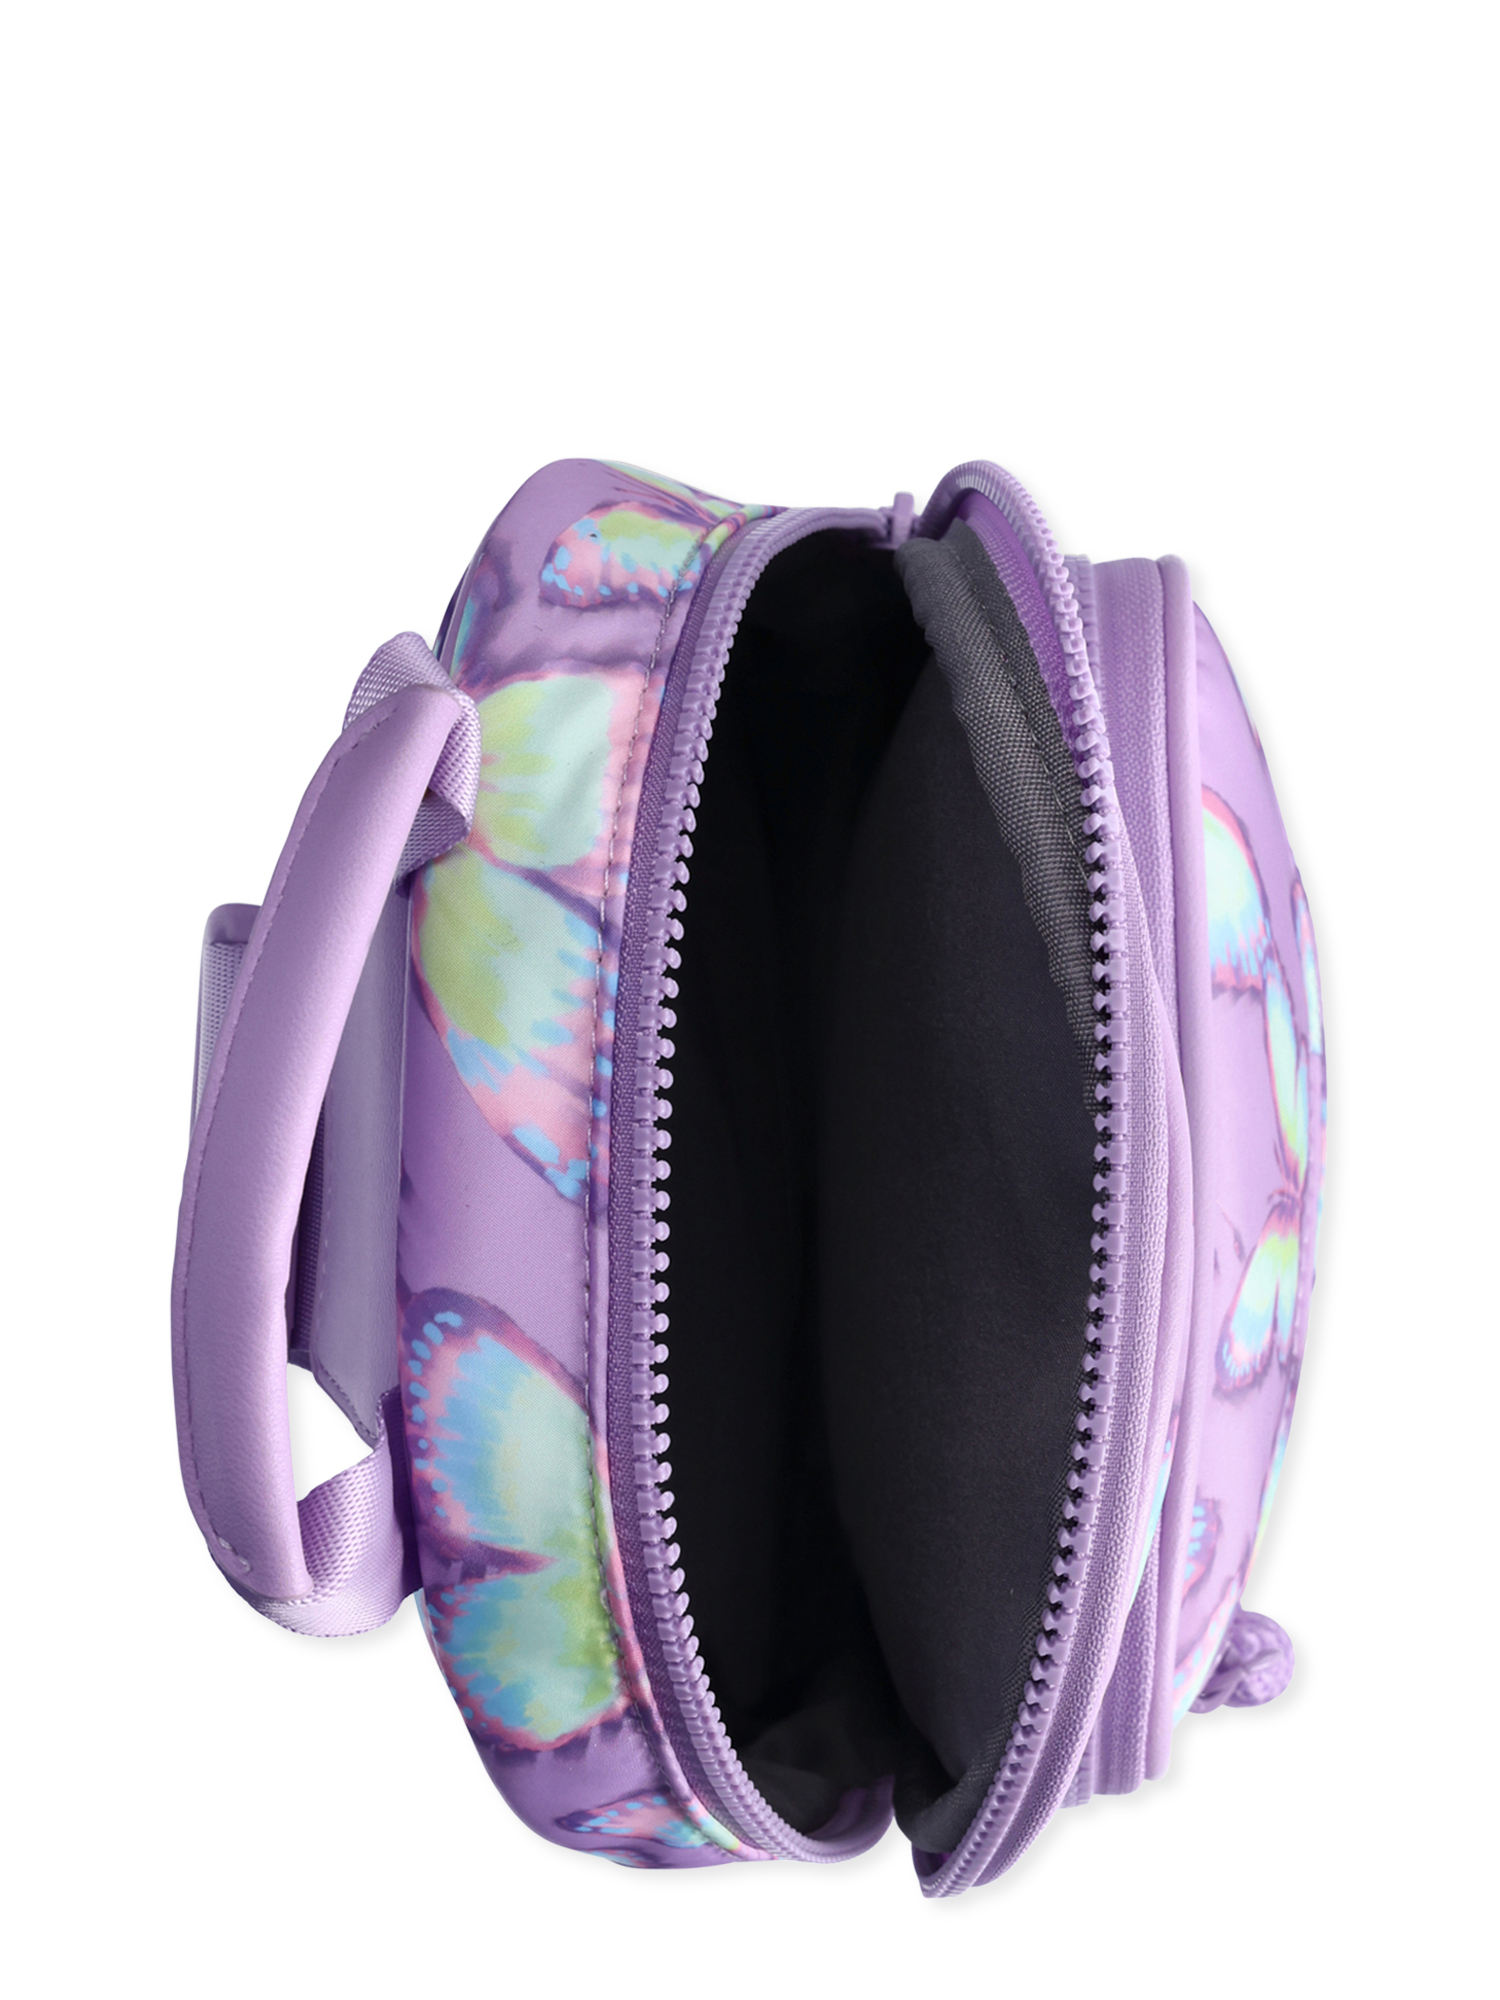 No Boundaries Women's Hands-Free Sling Bag, Lavender Butterfly - image 5 of 6